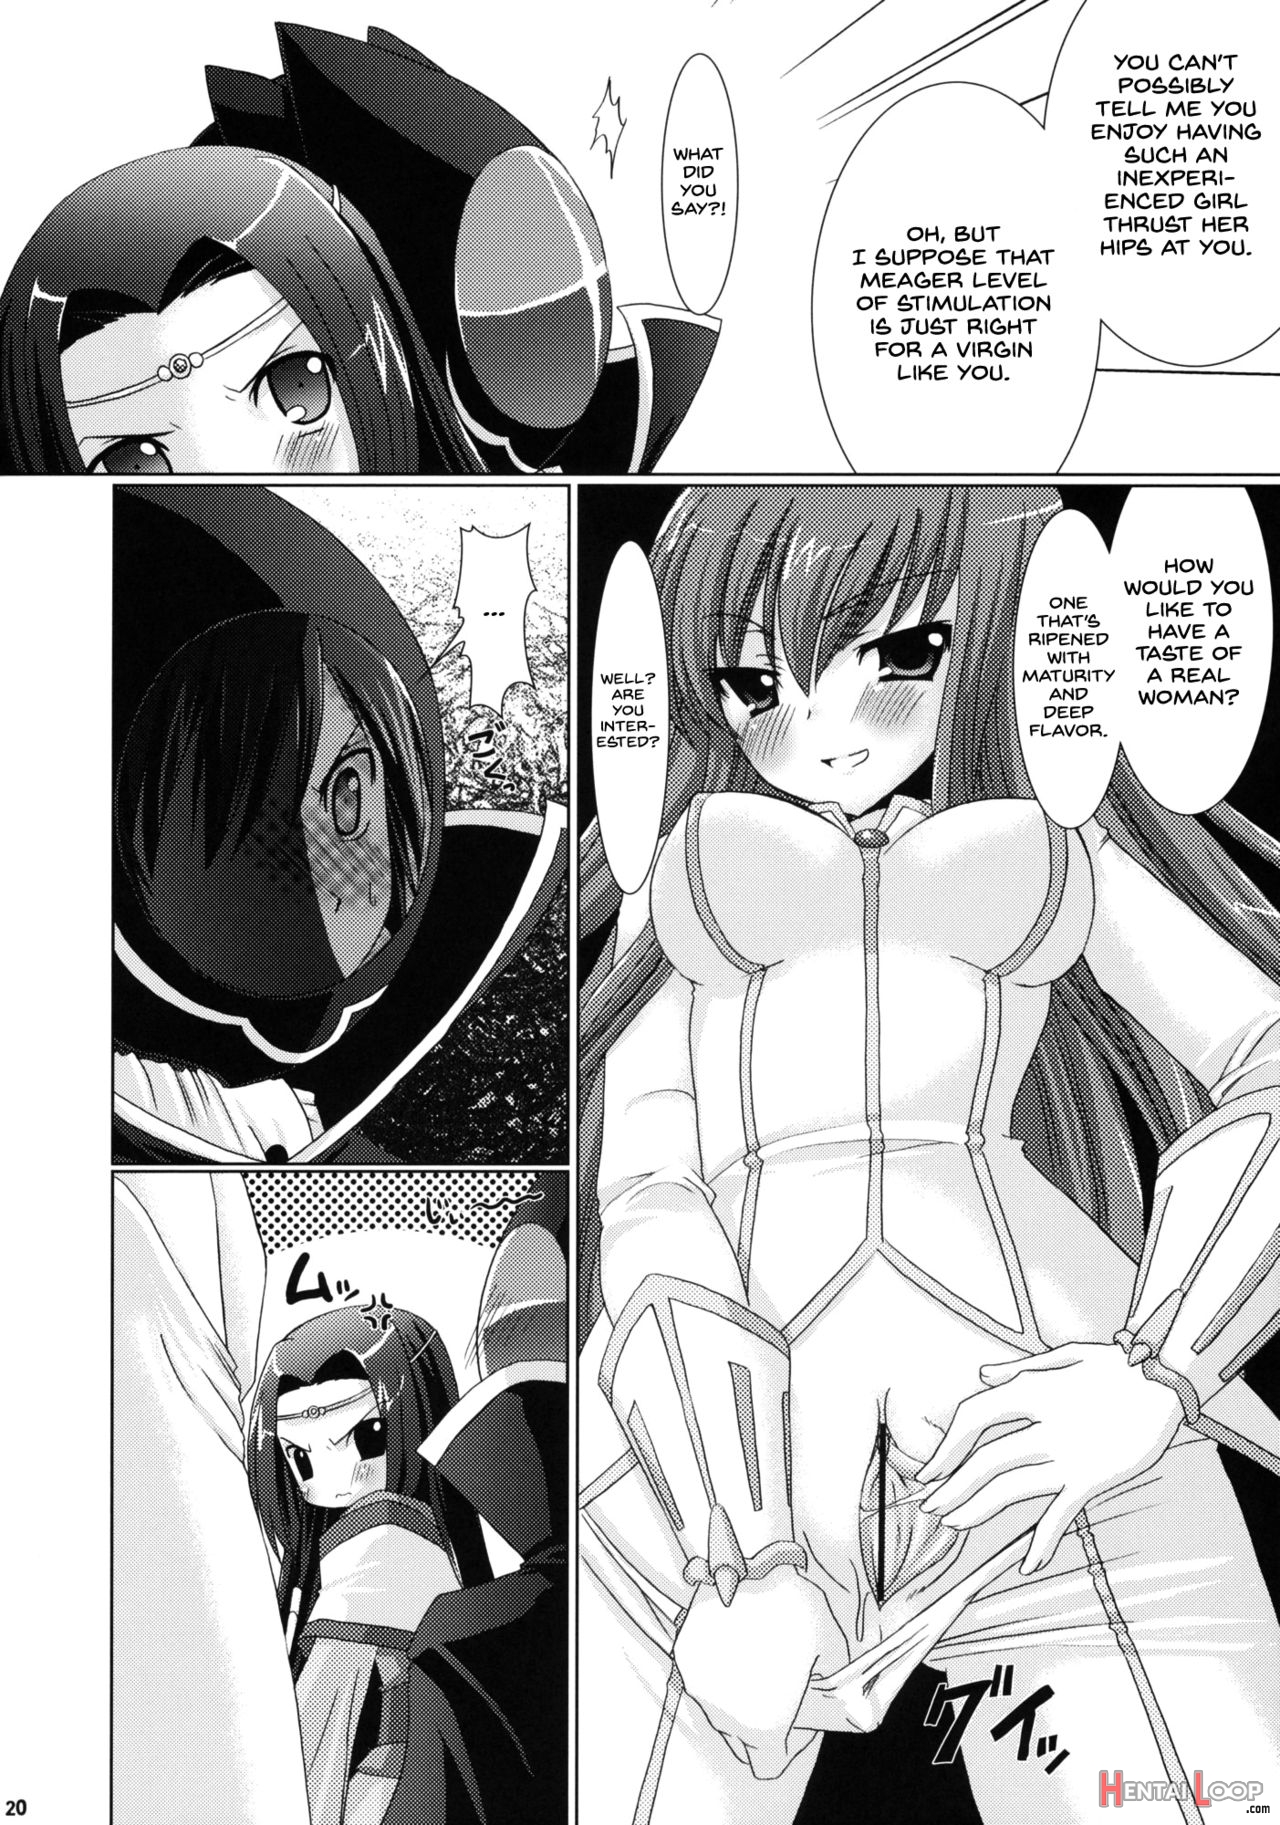 Kouhime Kyouhime page 20